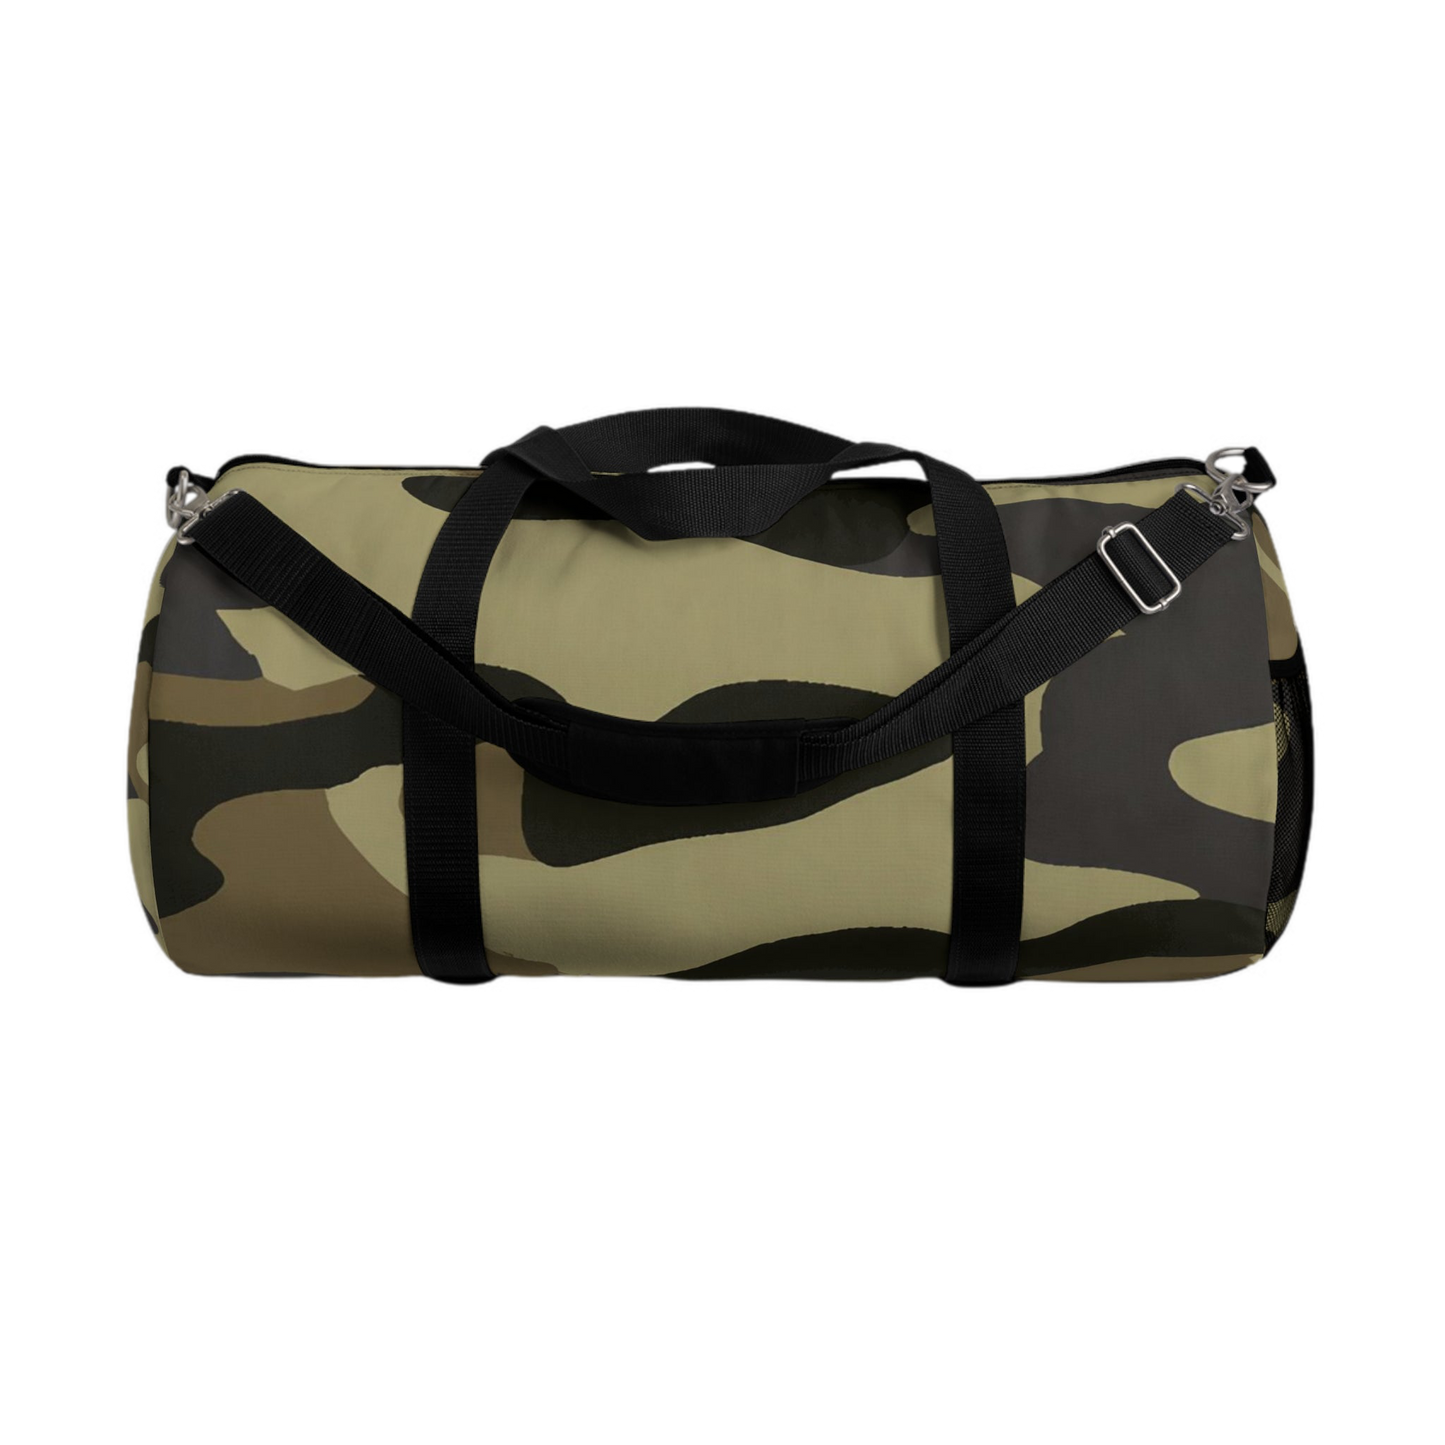 Fearless Silver Bullet - Duffle Bag - hdlm.brgnd